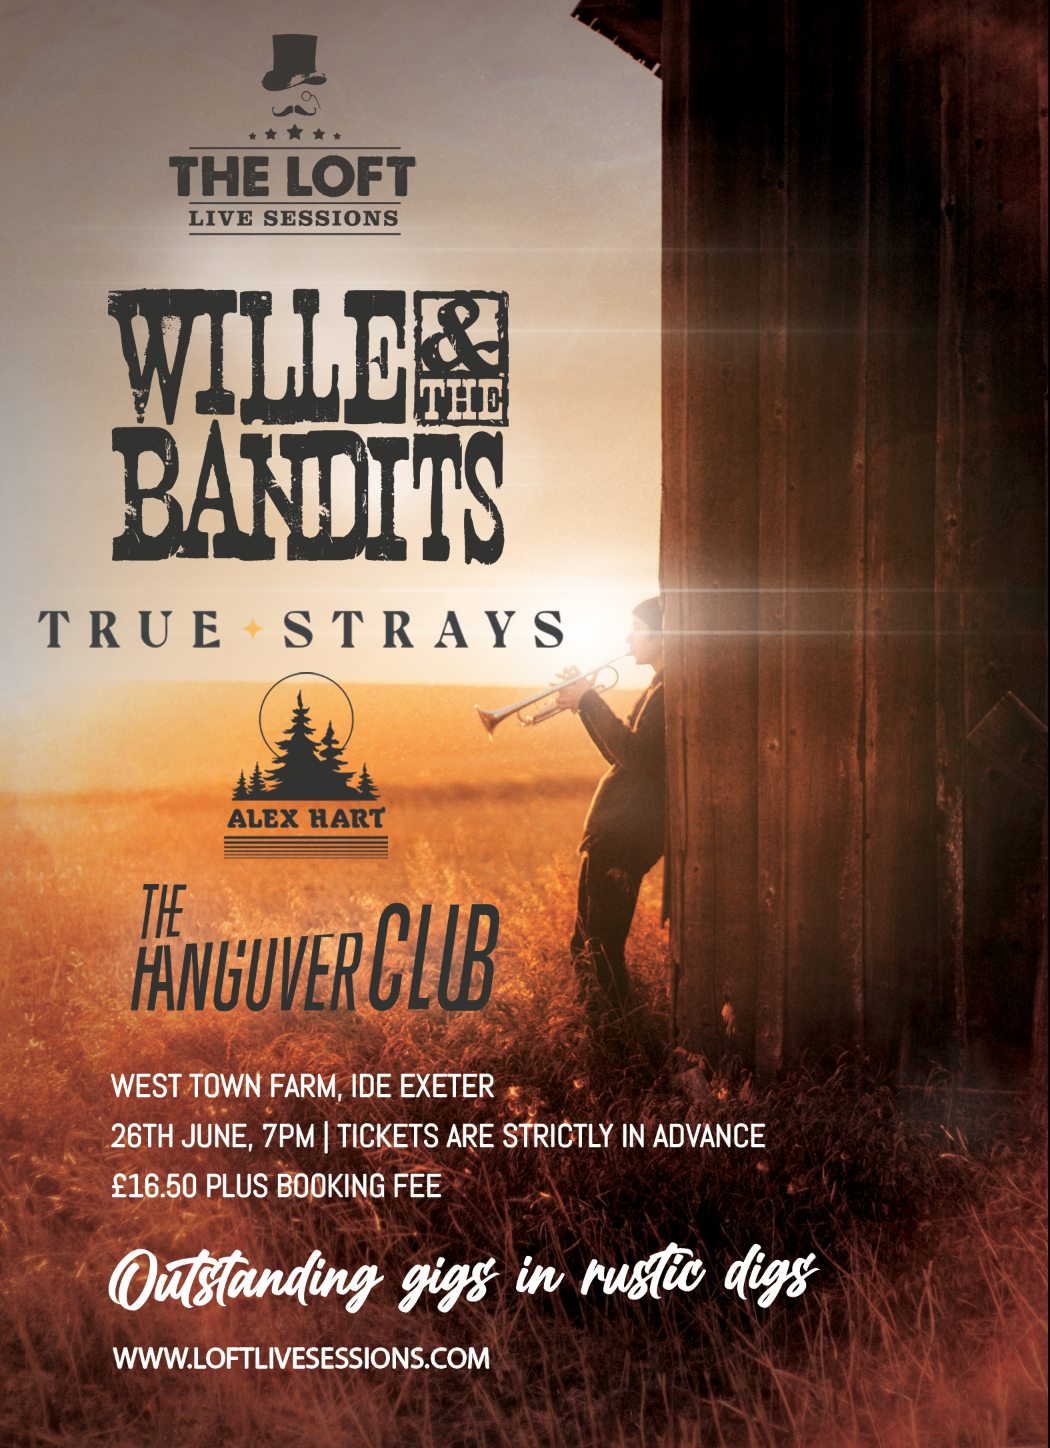 True Strays support Wille & The Bandits